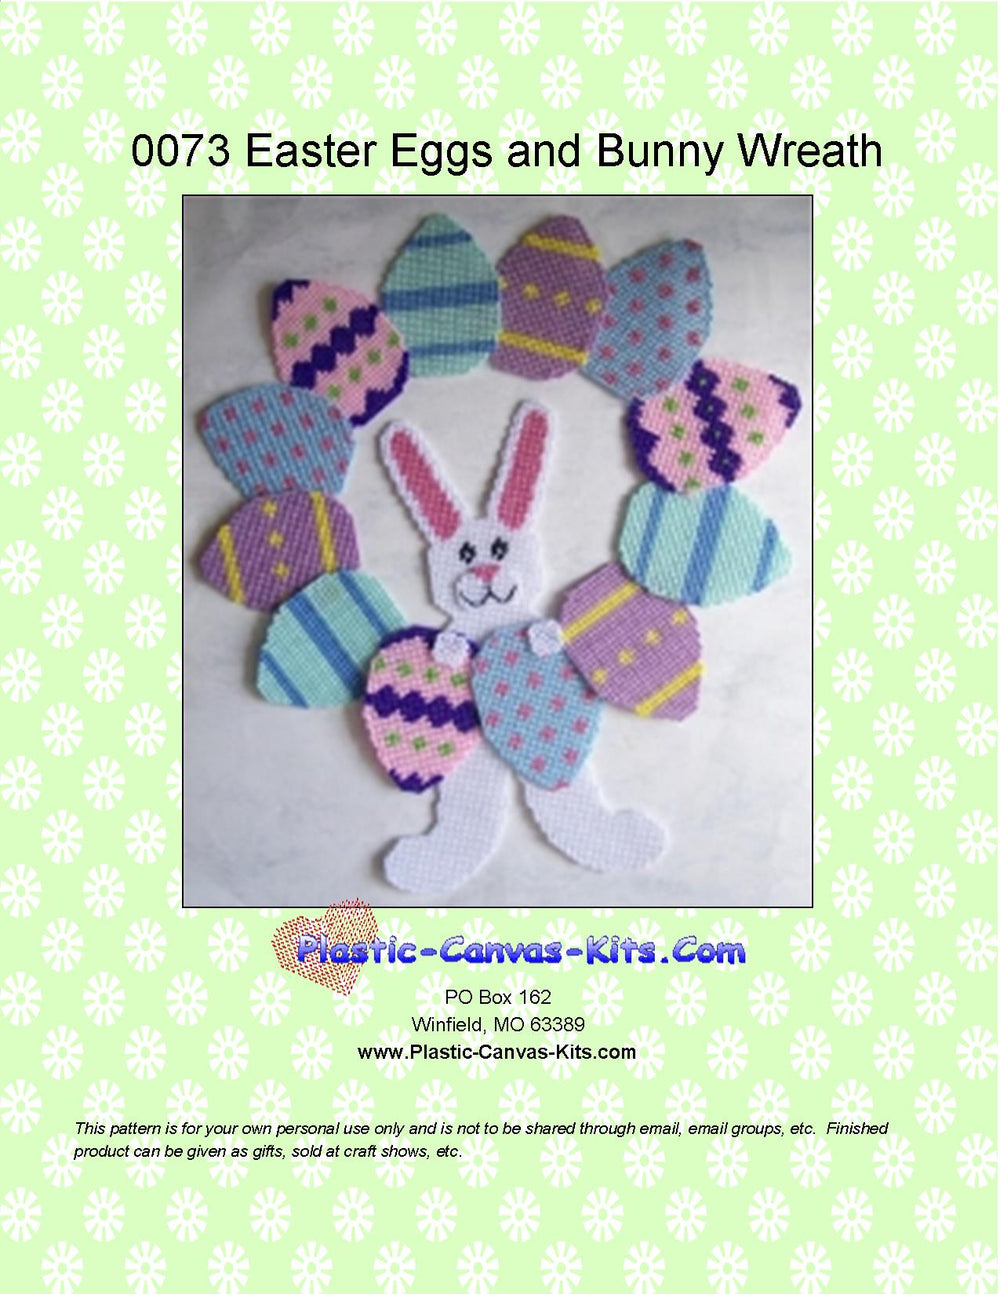 Easter Eggs and Bunny Wreath